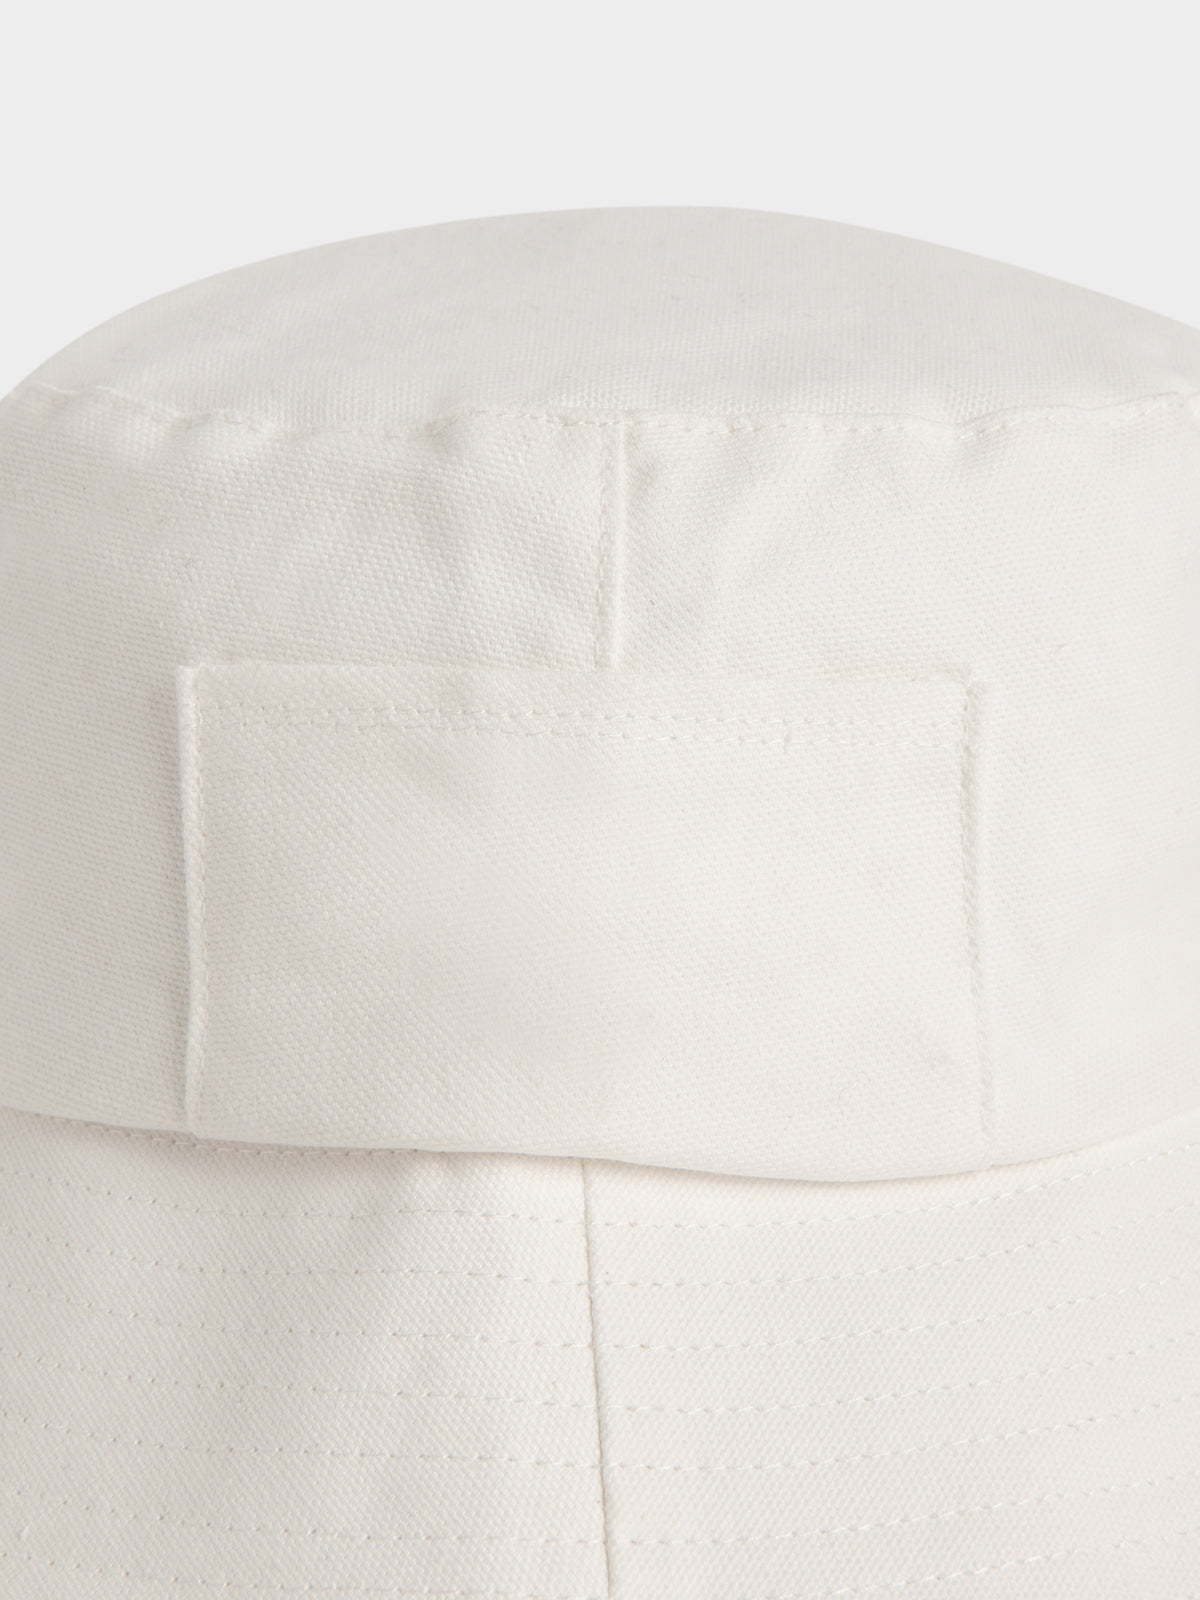 Classic Bucket Hat in White